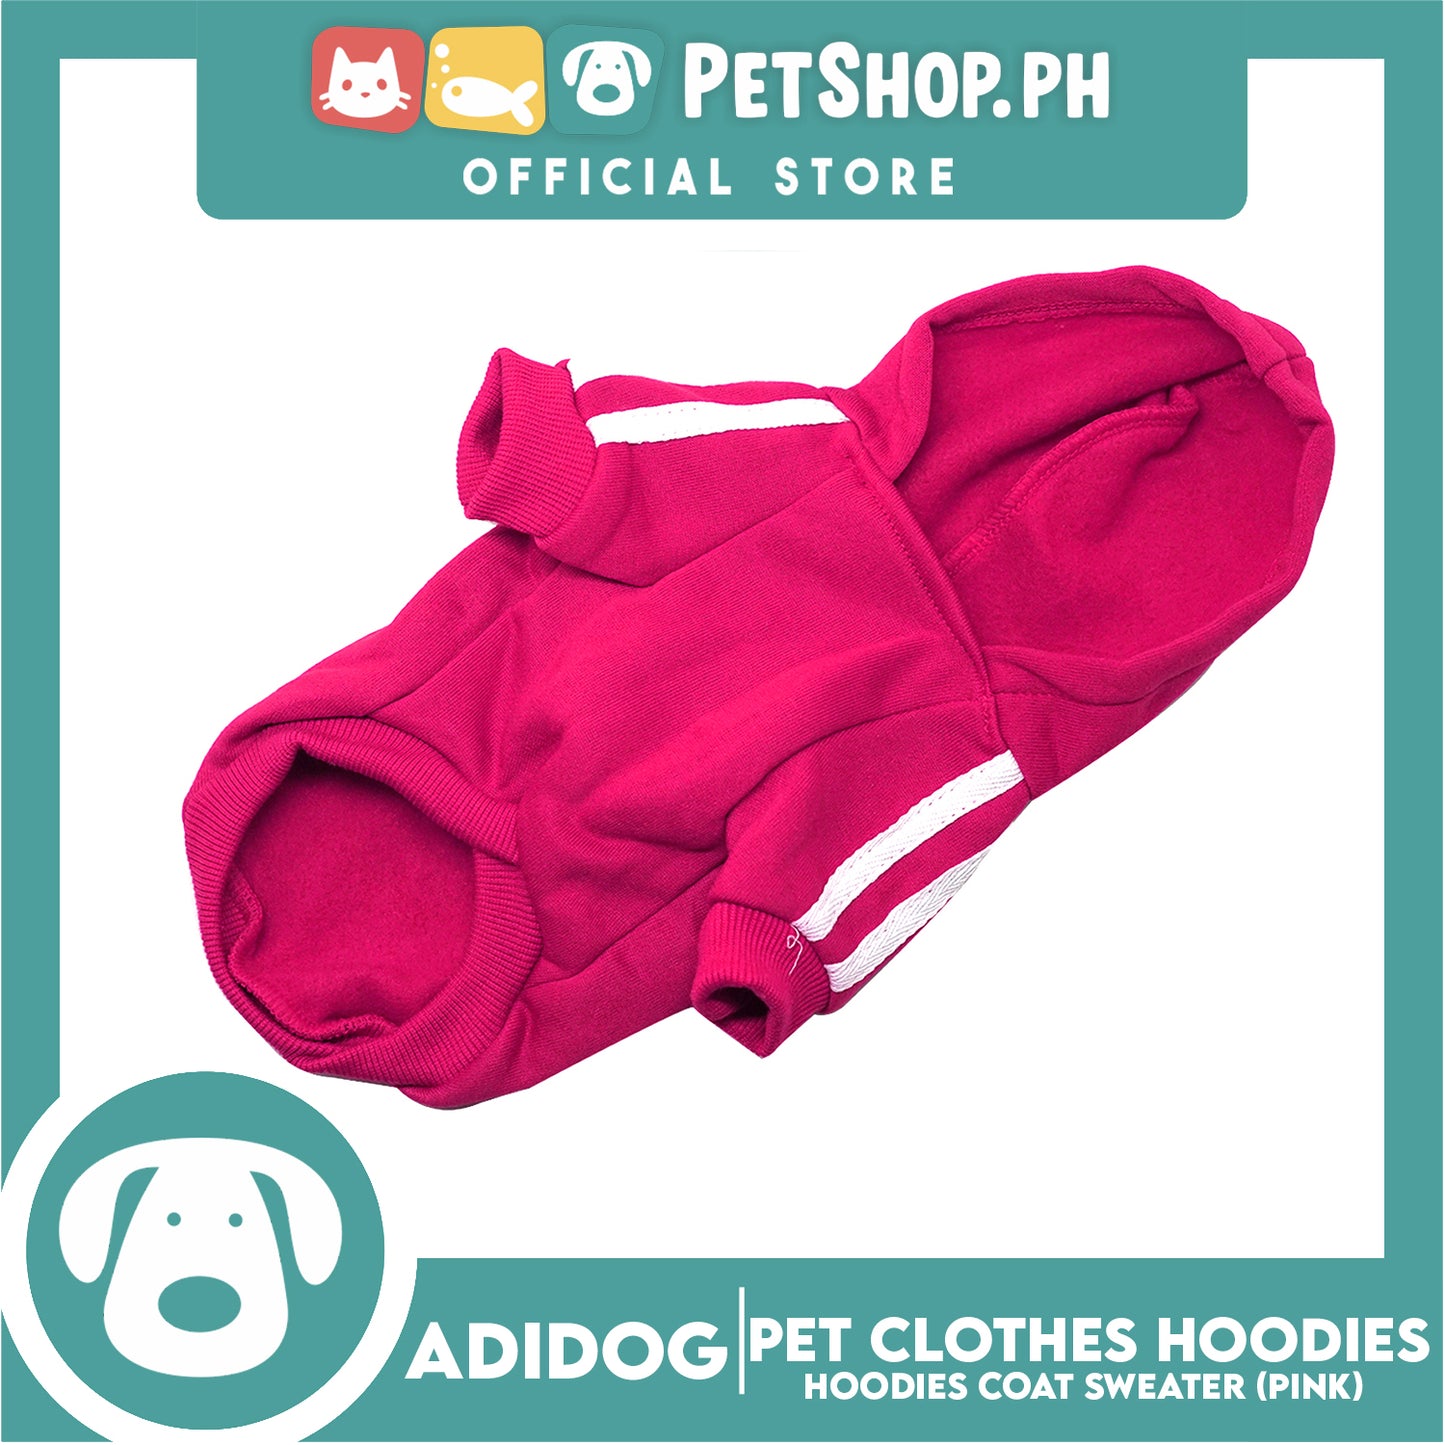 Adidog Pet Clothes Hoodies, Cute Warm Winter Hoodies Coat Sweater (Pink) Extra Small